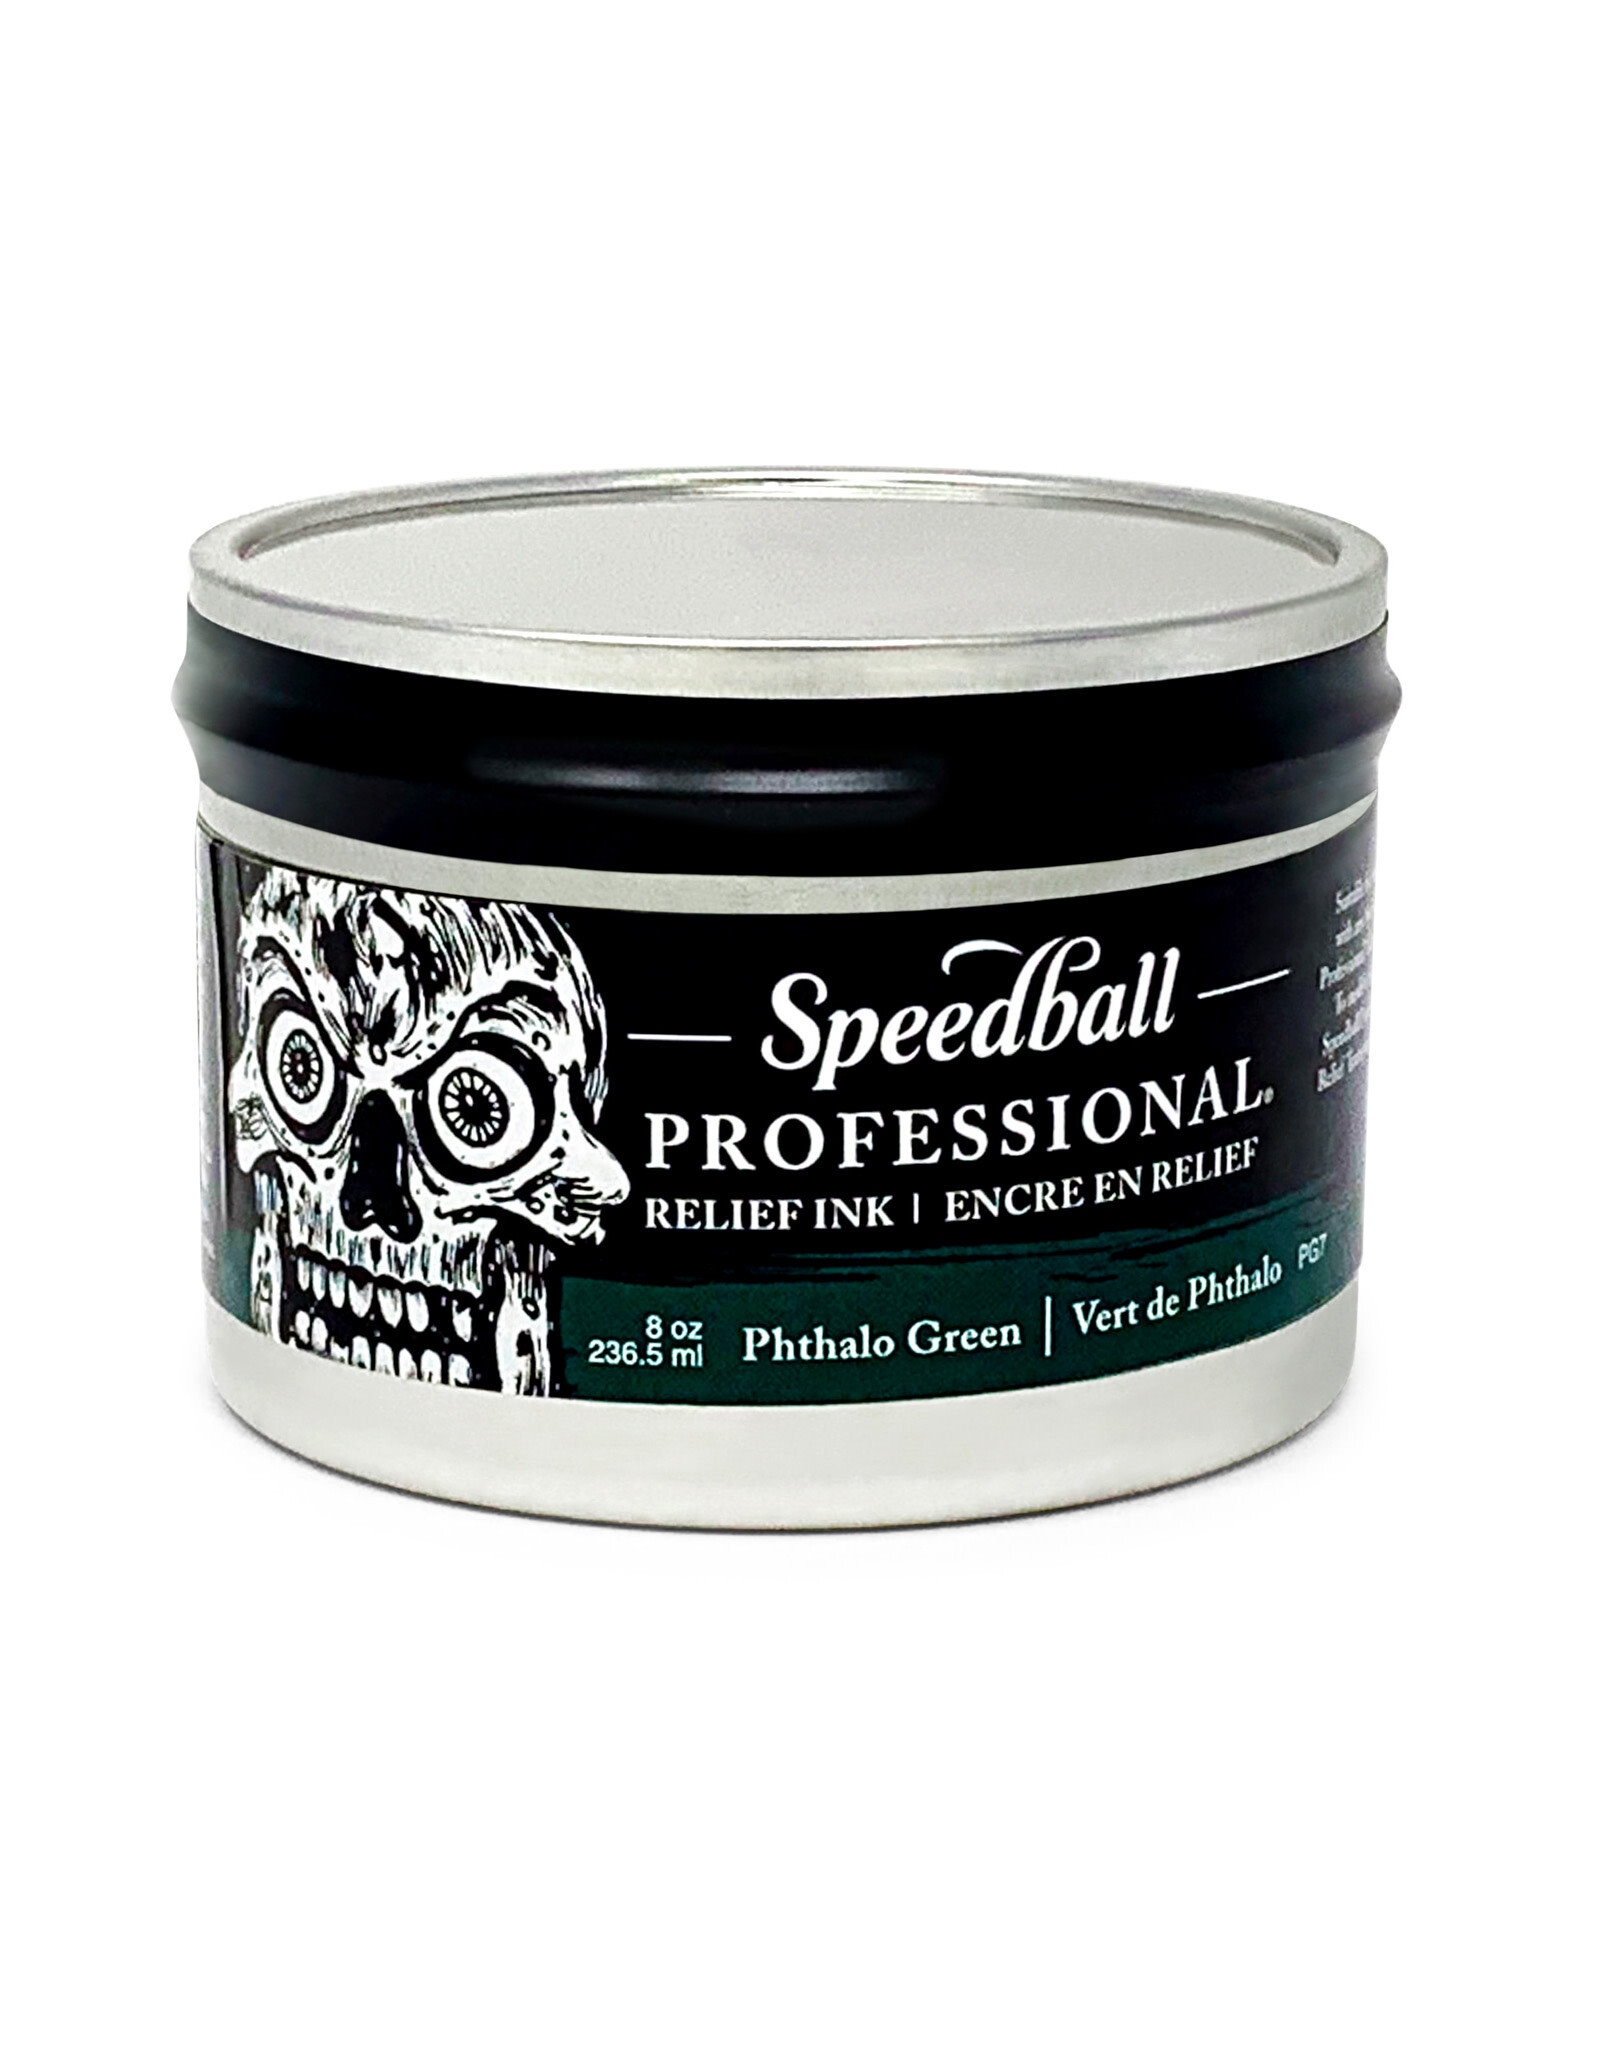 SPEEDBALL ART PRODUCTS Speedball Professional Relief Ink, Phthalo Green, 8oz